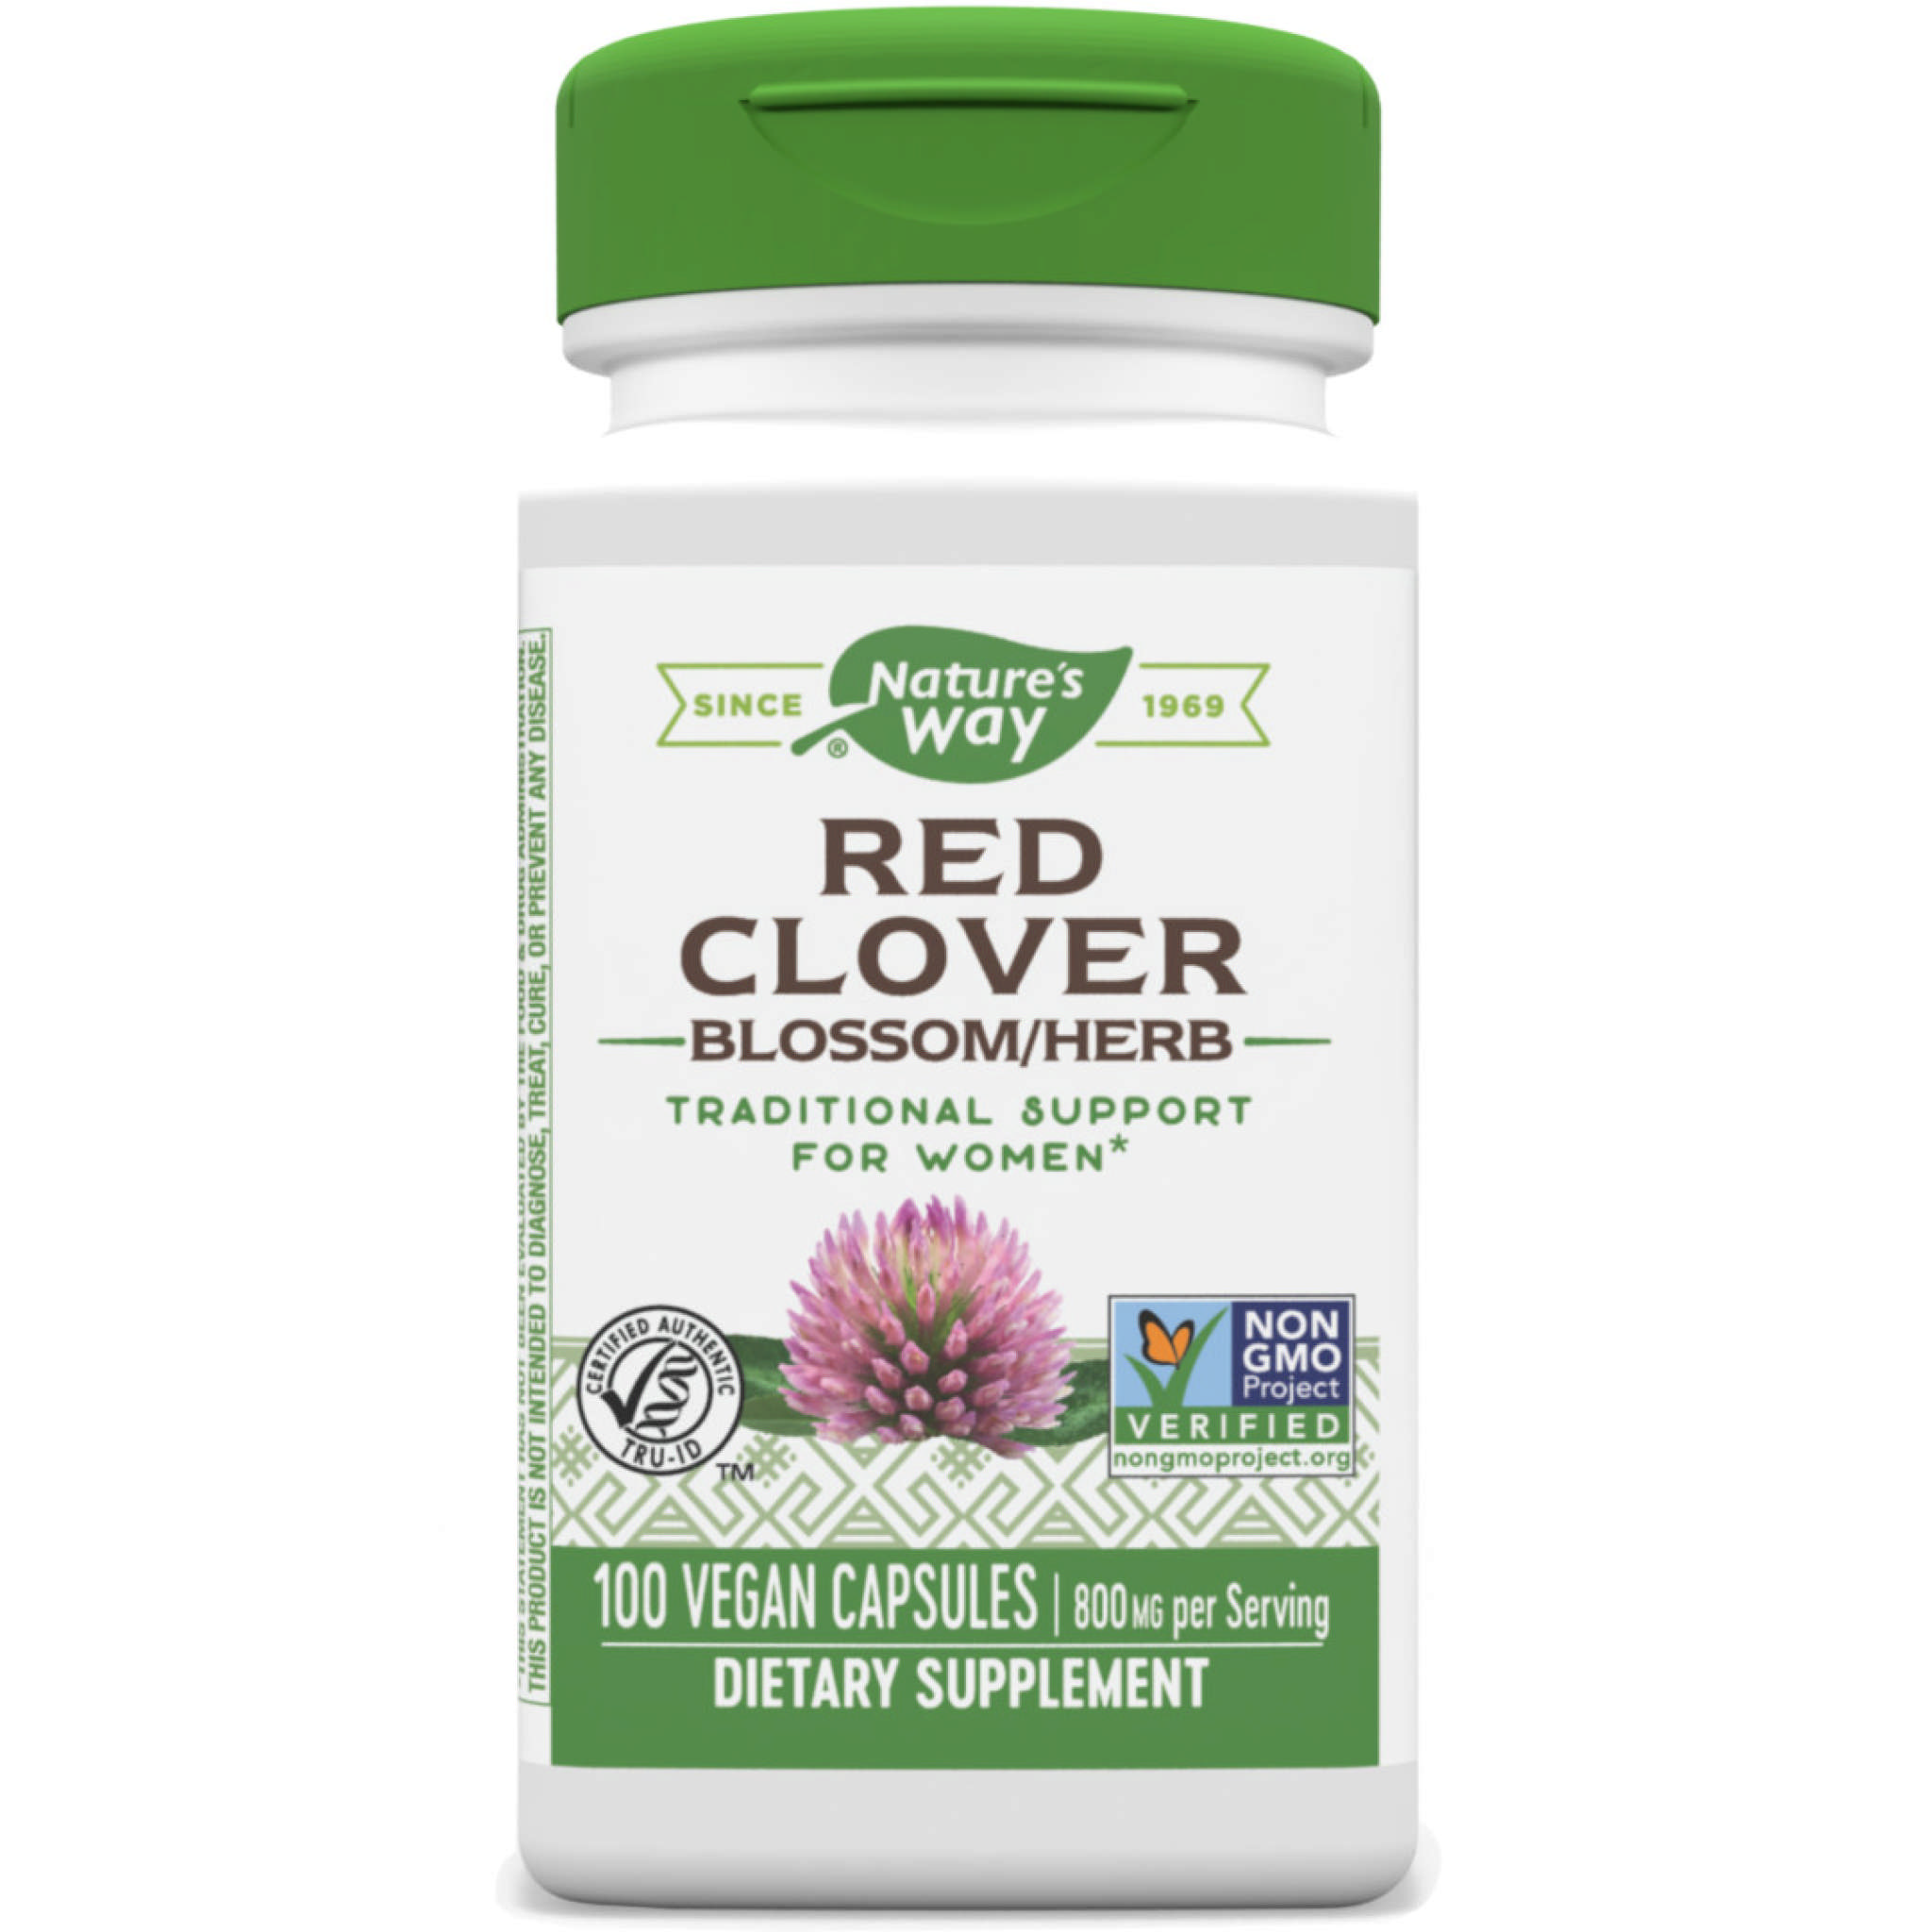 Natures Way - Red Clover Blossom & Herb